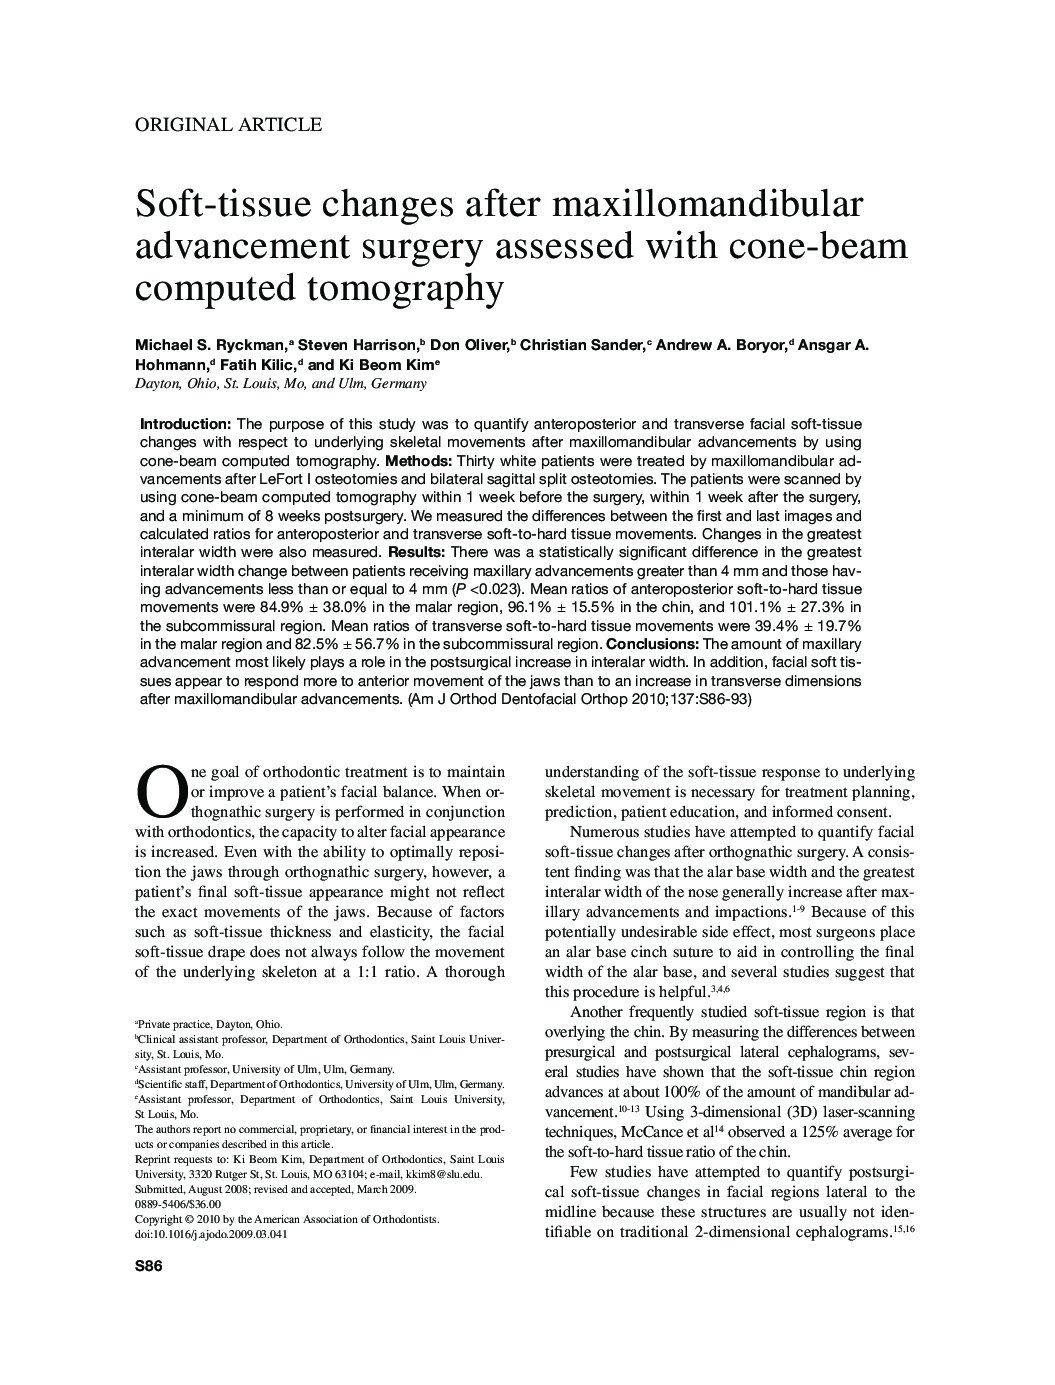 Soft-tissue changes after maxillomandibular advancement surgery assessed with cone-beam computed tomography 